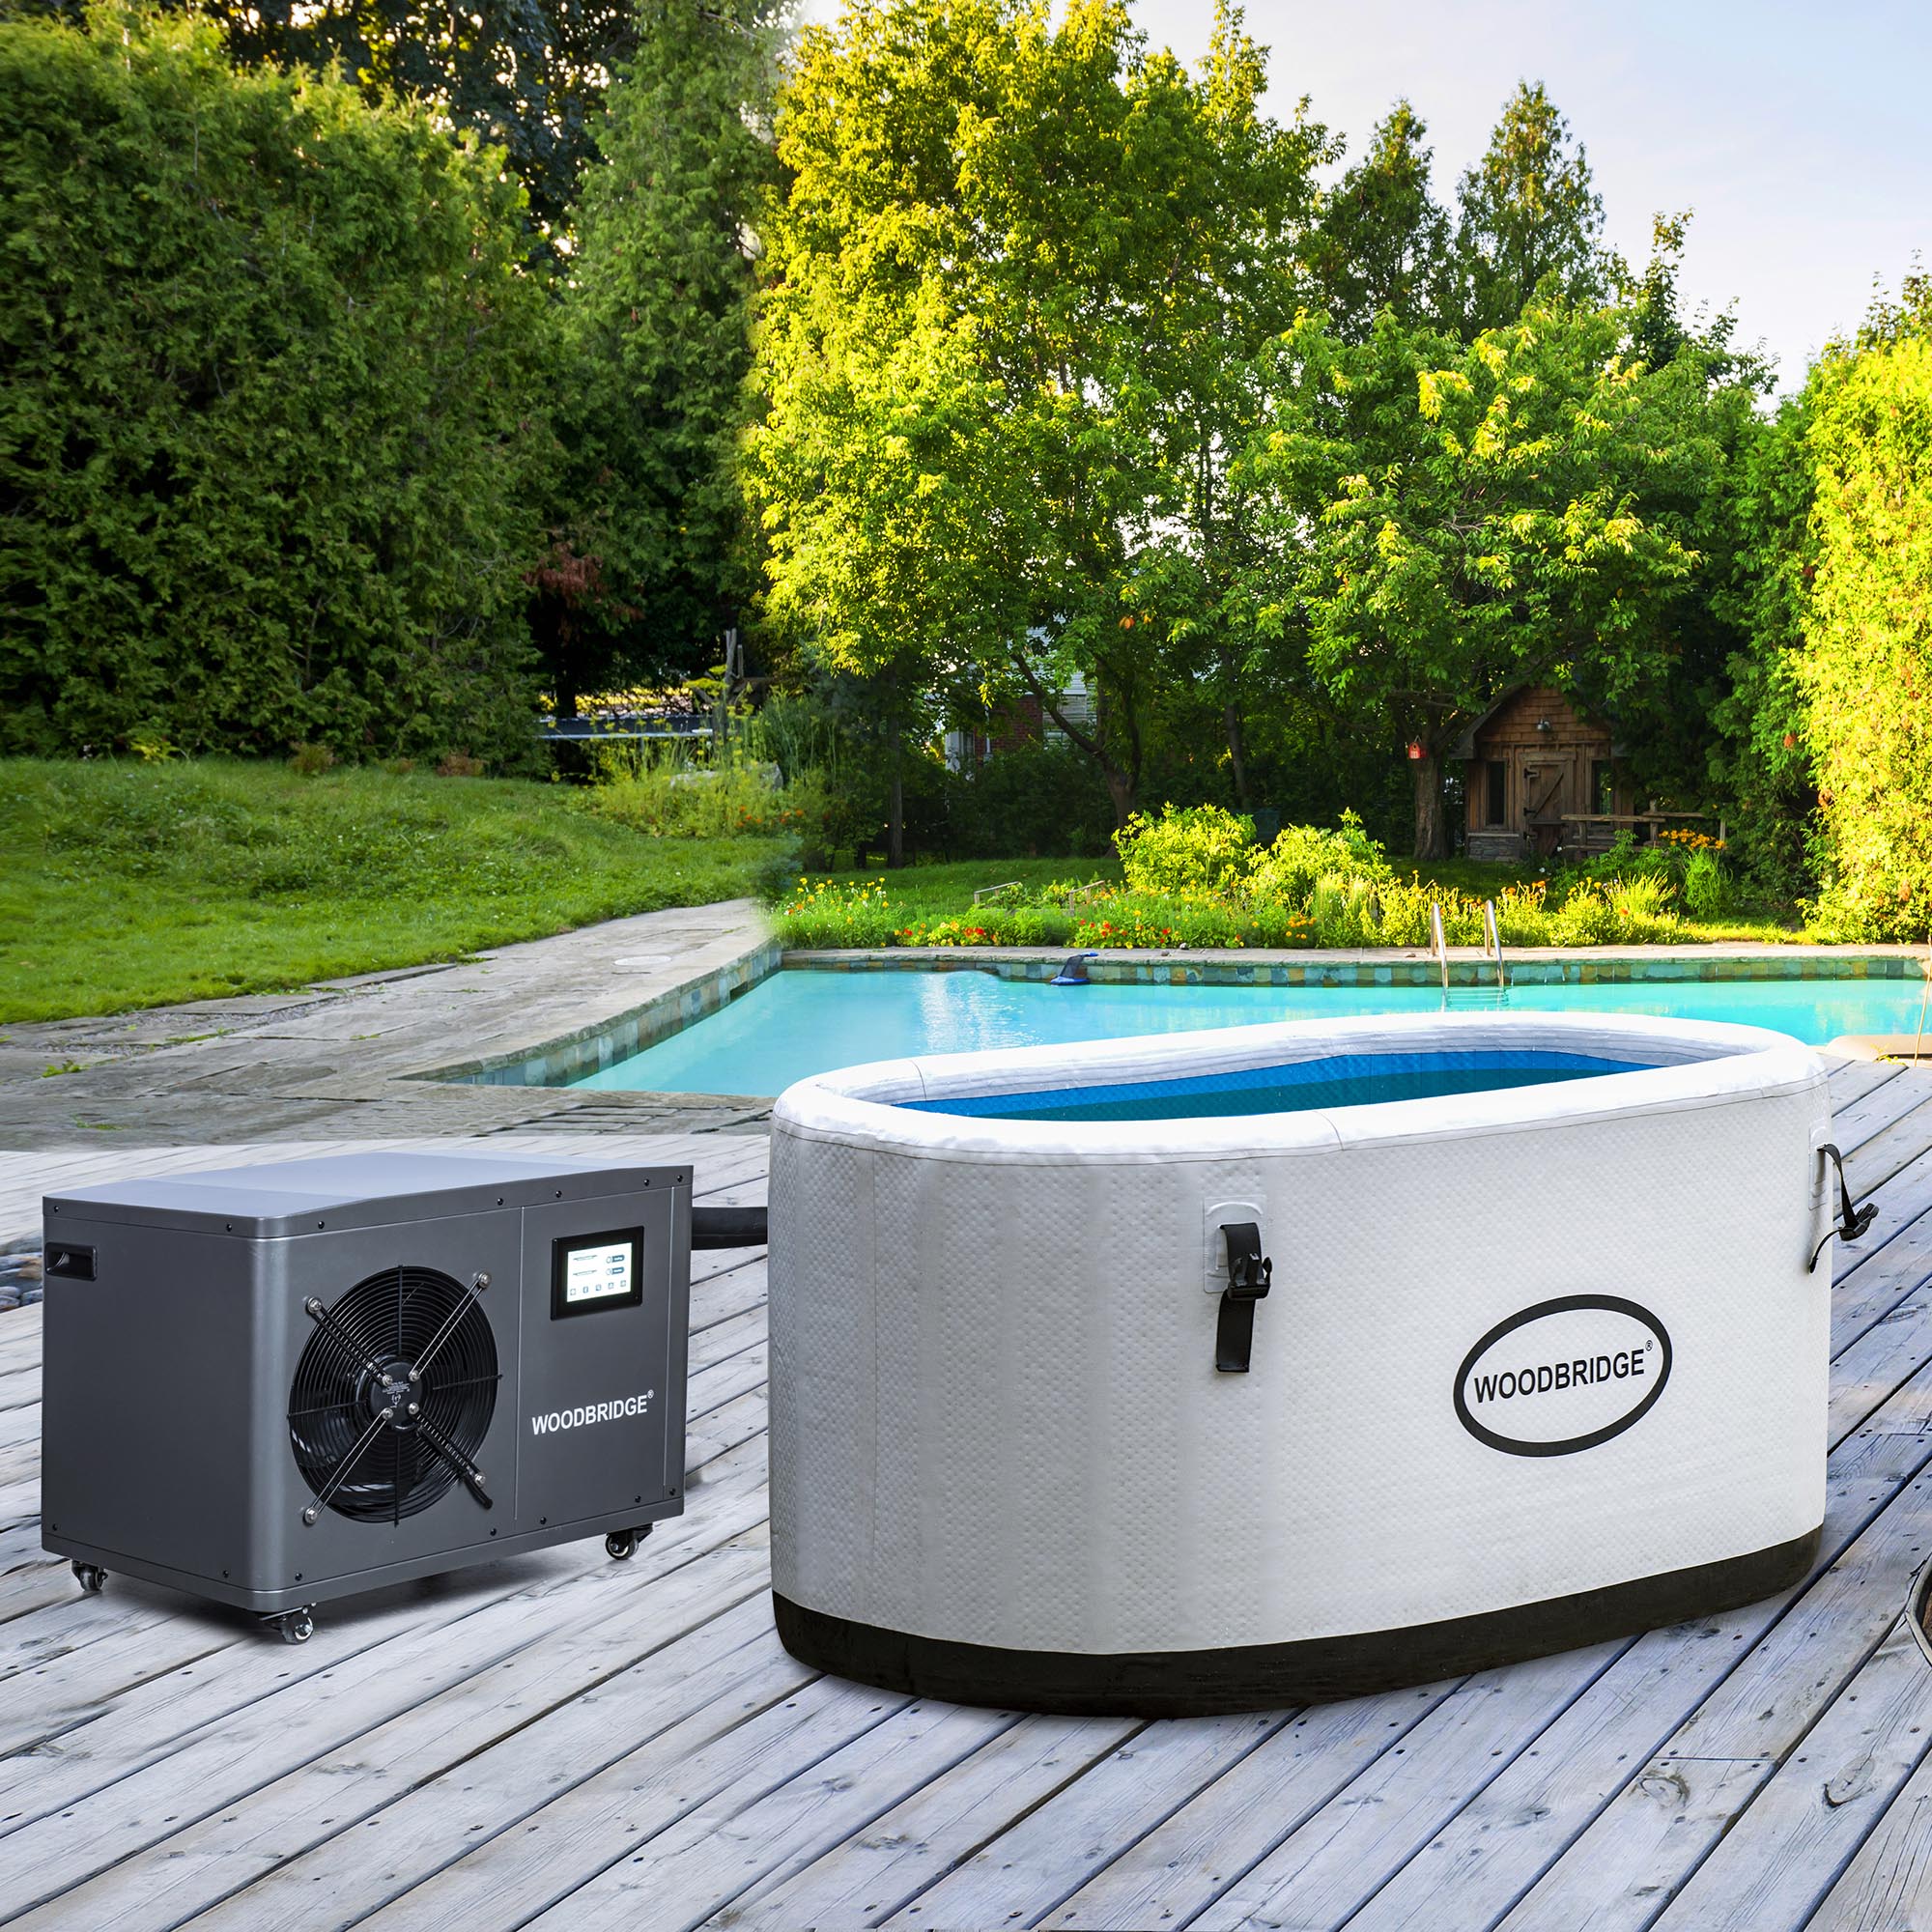 WOODBRIDGE Inflatable Cold Plunge Tub with 1.3 HP High-Performance Cooling and Heating Chiller in Gray,Filter circulation system, PVC Insulated Lid, Hand Pump and Repair Kit Included, Anti-Slid Bottom